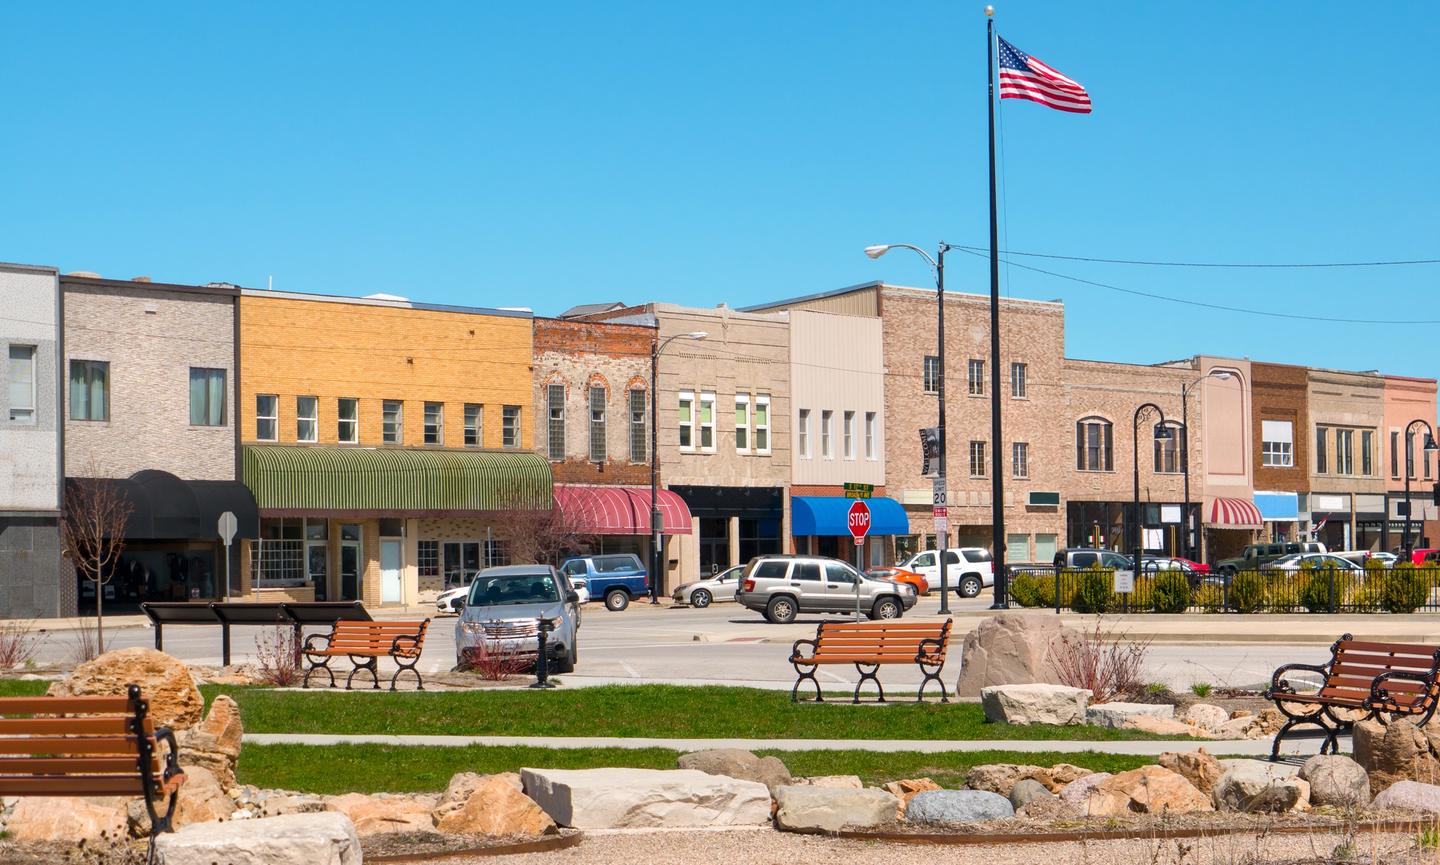 The City of Mattoon provides art and entertainment venues, retail centers, and a host of dining and lodging options.